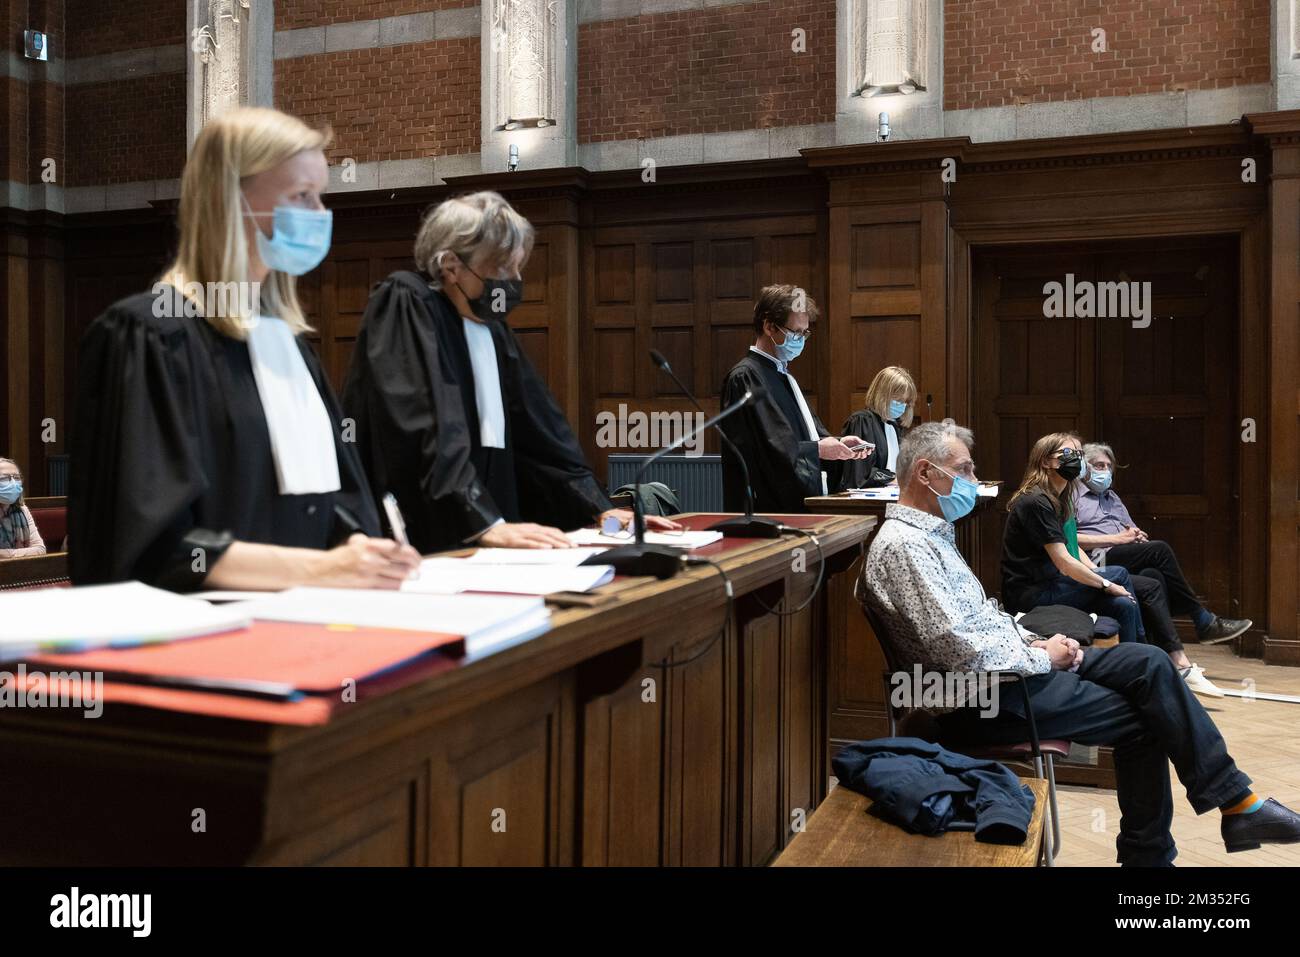 Illustration picture shows a session in the retrial of the doctor who euthanized Tine Nys, Thursday 20 May 2021, before the correctional court of Dendermonde. 38-year-old Nys was given euthanasia in 2010 to release her from severe psychological suffering. Her family didn't agree and took legal action. The doctor was acquitted earlier by the East-Flanders assizes court. BELGA PHOTO JAMES ARTHUR GEKIERE Stock Photo